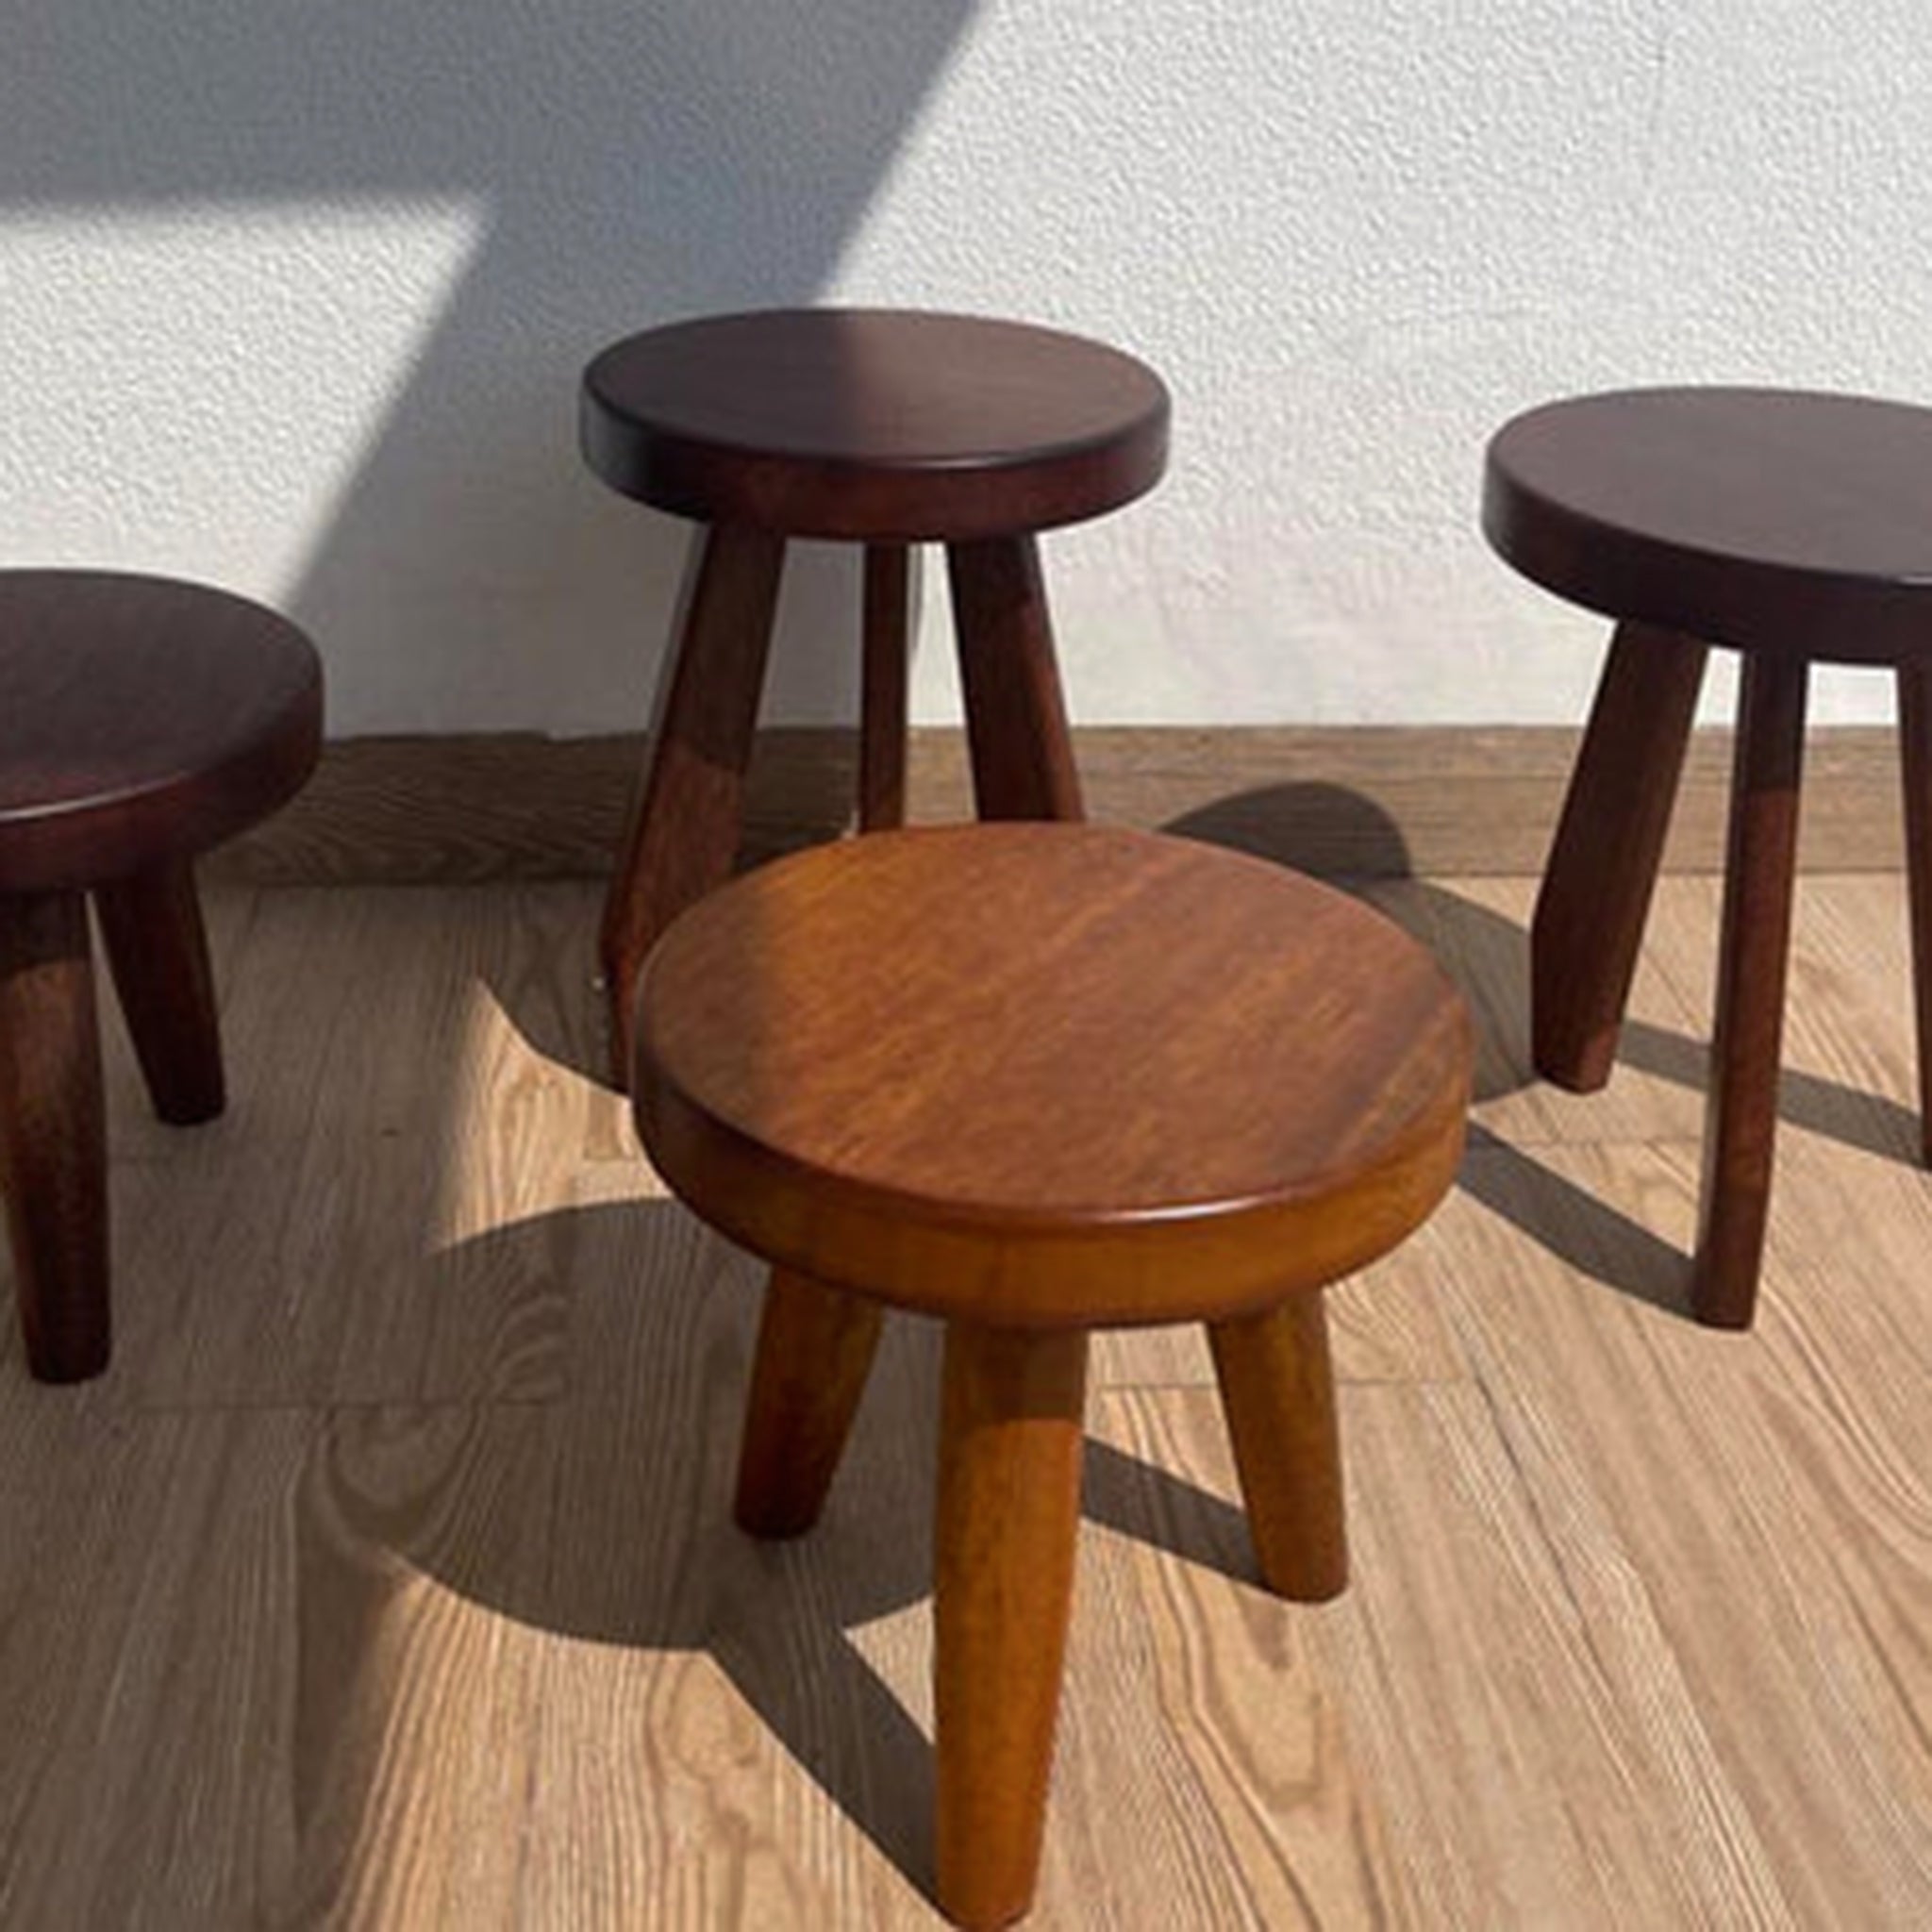 Four wooden three-legged stools in different shades of brown on a sunlit wooden floor